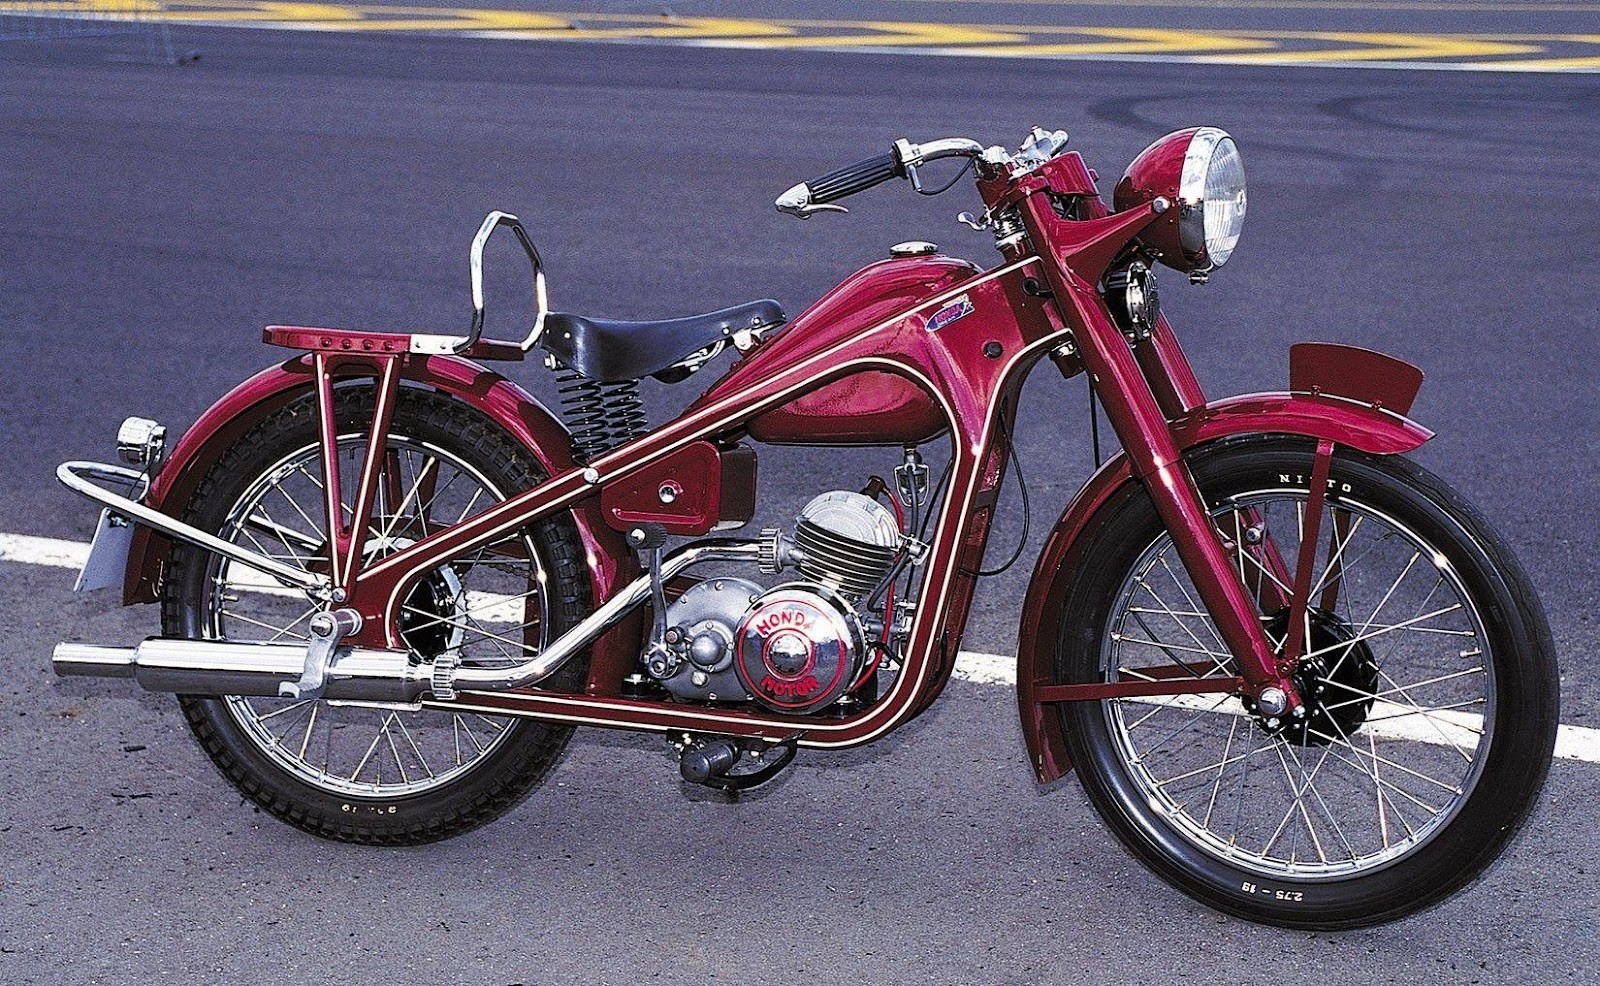 1949 Honda Type D Dream, 98cc, single cylinder, two stroke, 2 speed, air cooled engine.